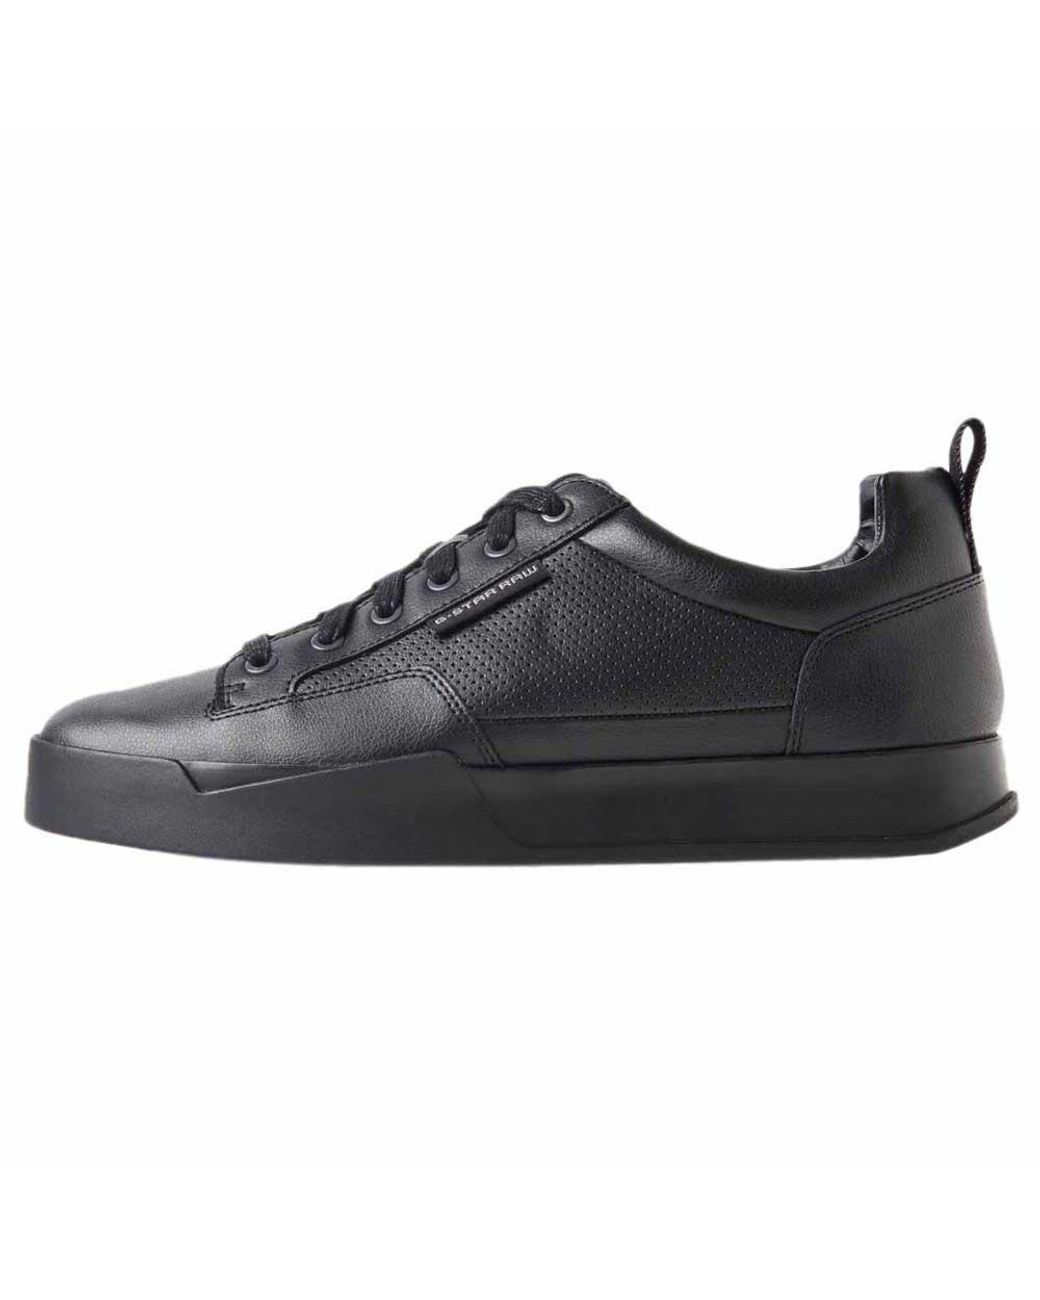 G-Star RAW Leather Rackam Core Low in Black for Men - Save 58% - Lyst